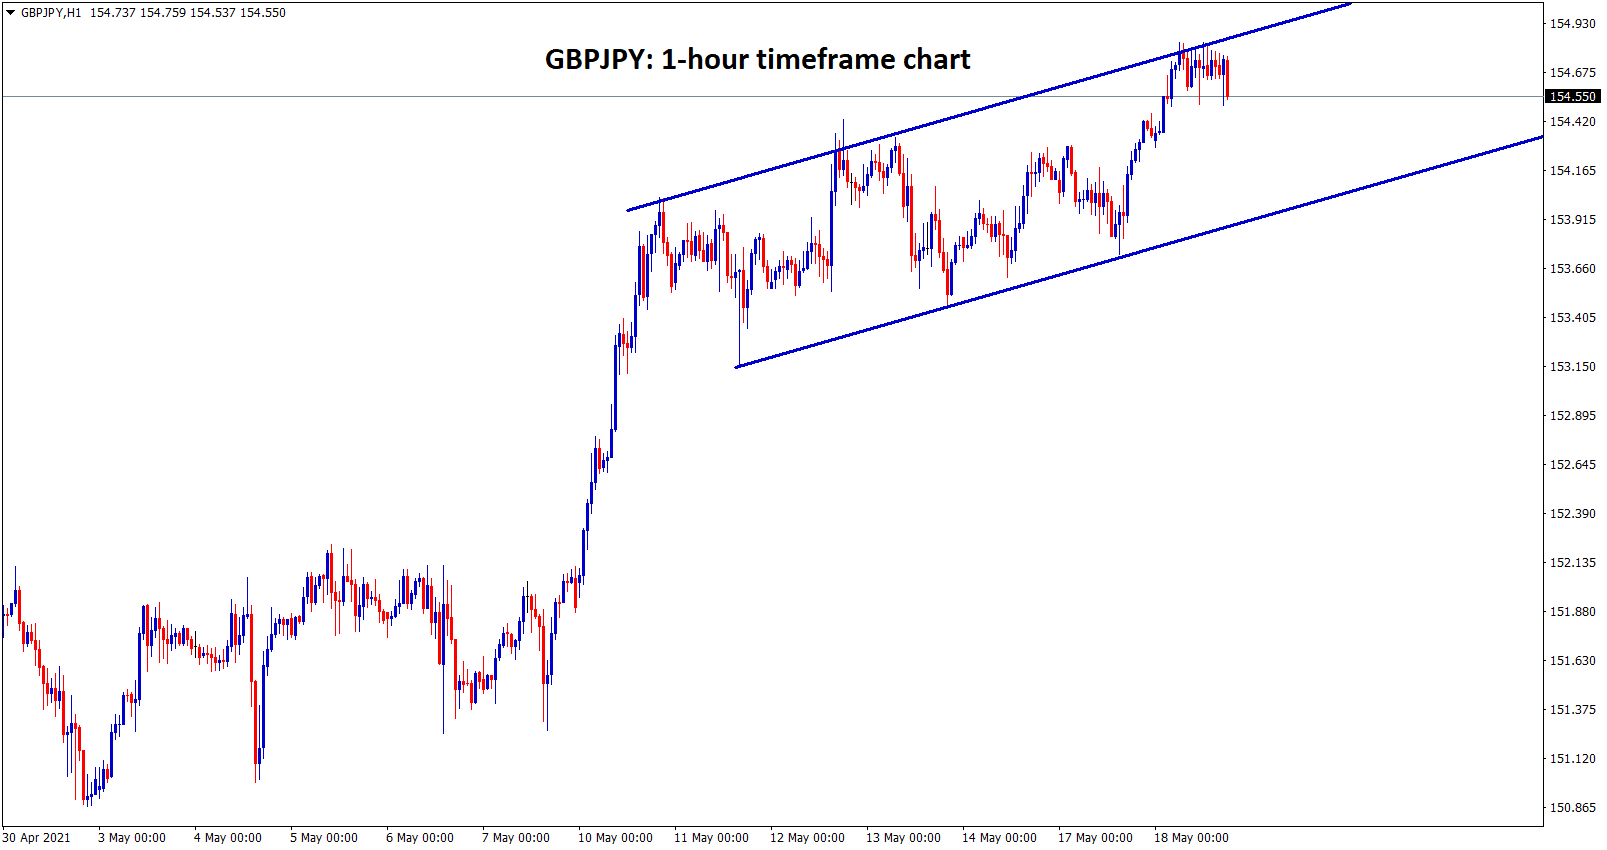 GBPJPY is moving in an Ascending channel in the H1 chart.